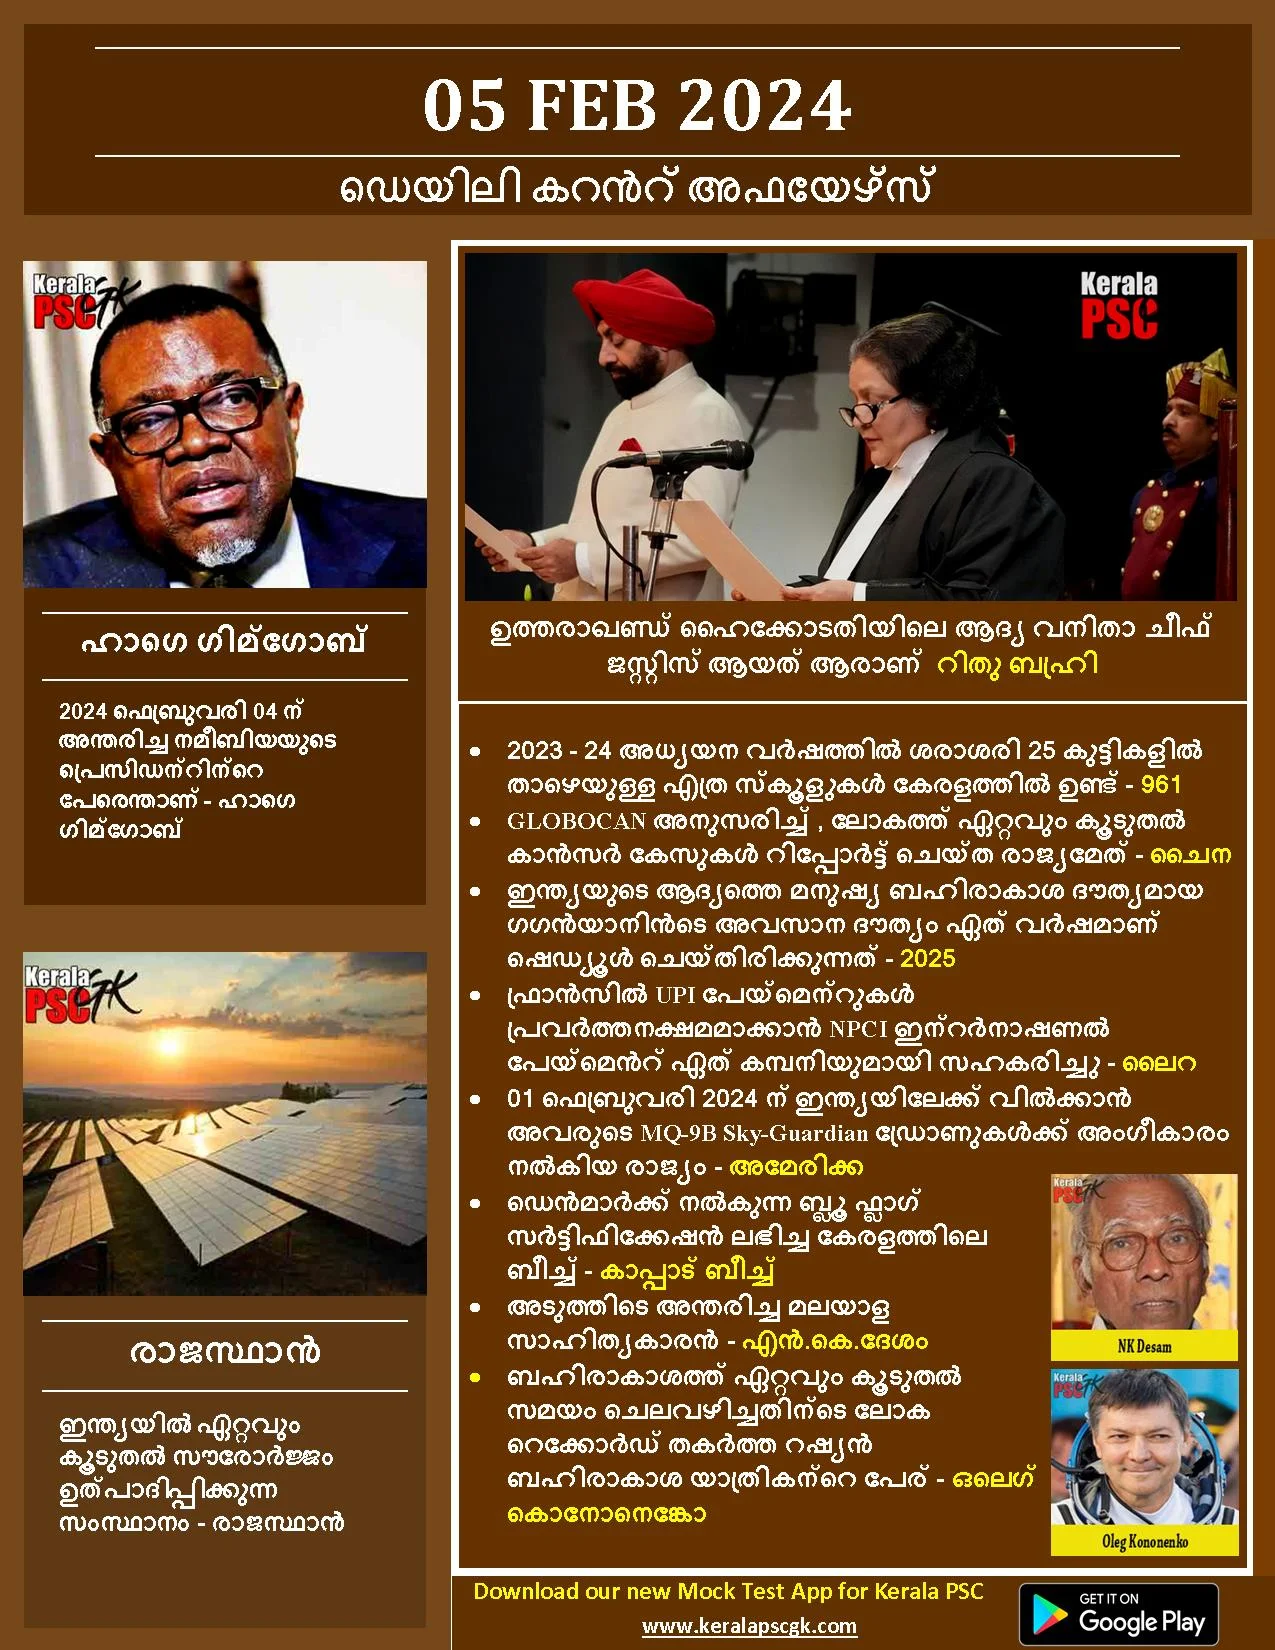 Daily Current Affairs in Malayalam 05 Feb 2024